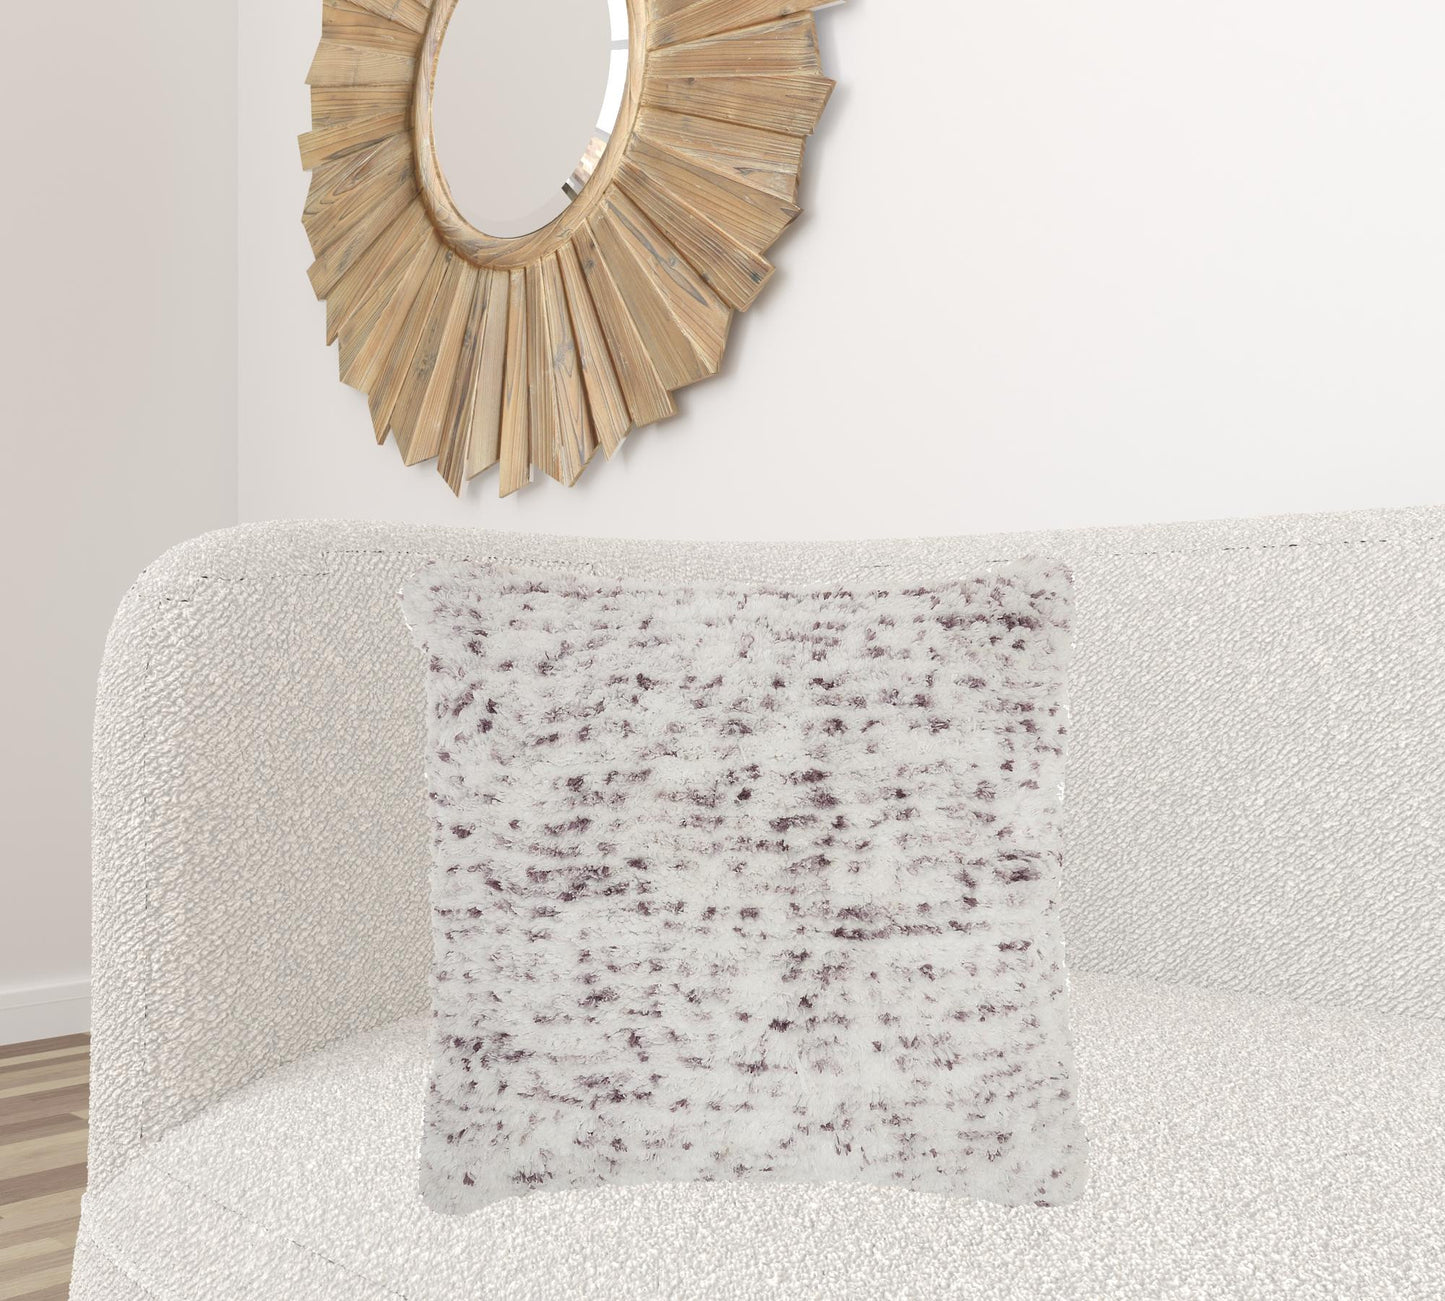 Soft Shaggy Purple And White Spotted Throw Pillow